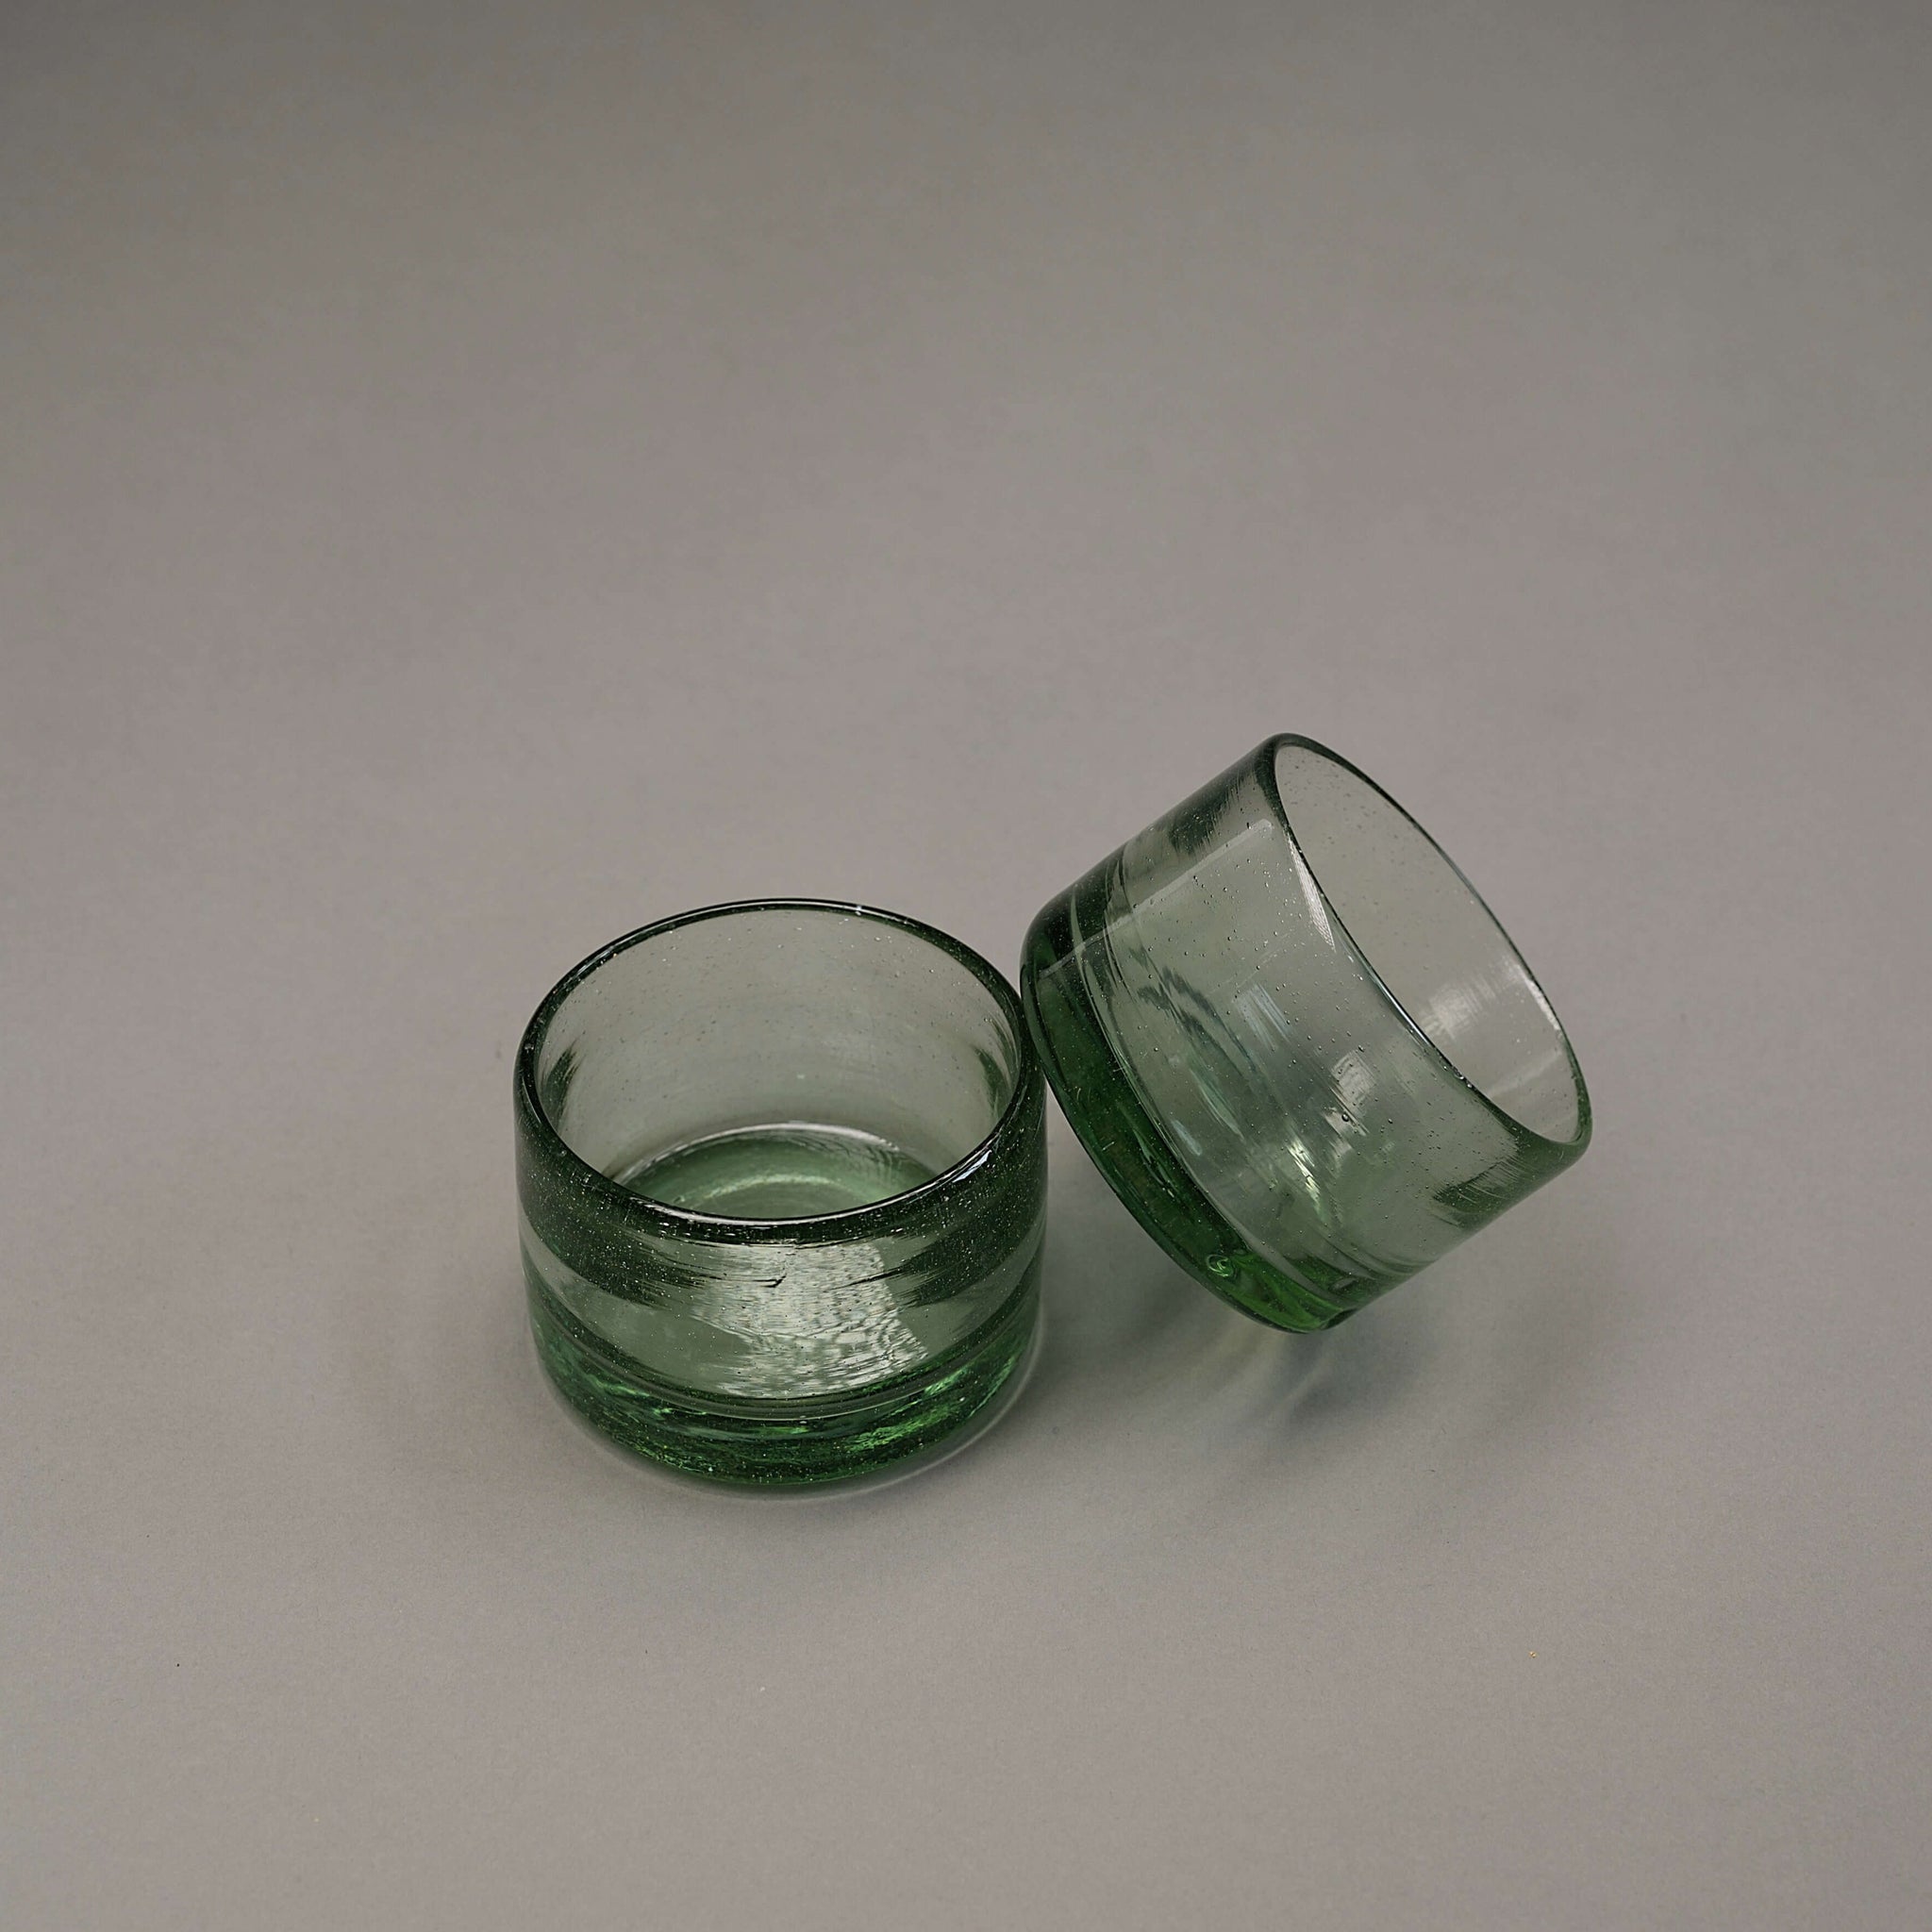 A set of two bodega glass bowls stacked against each other.